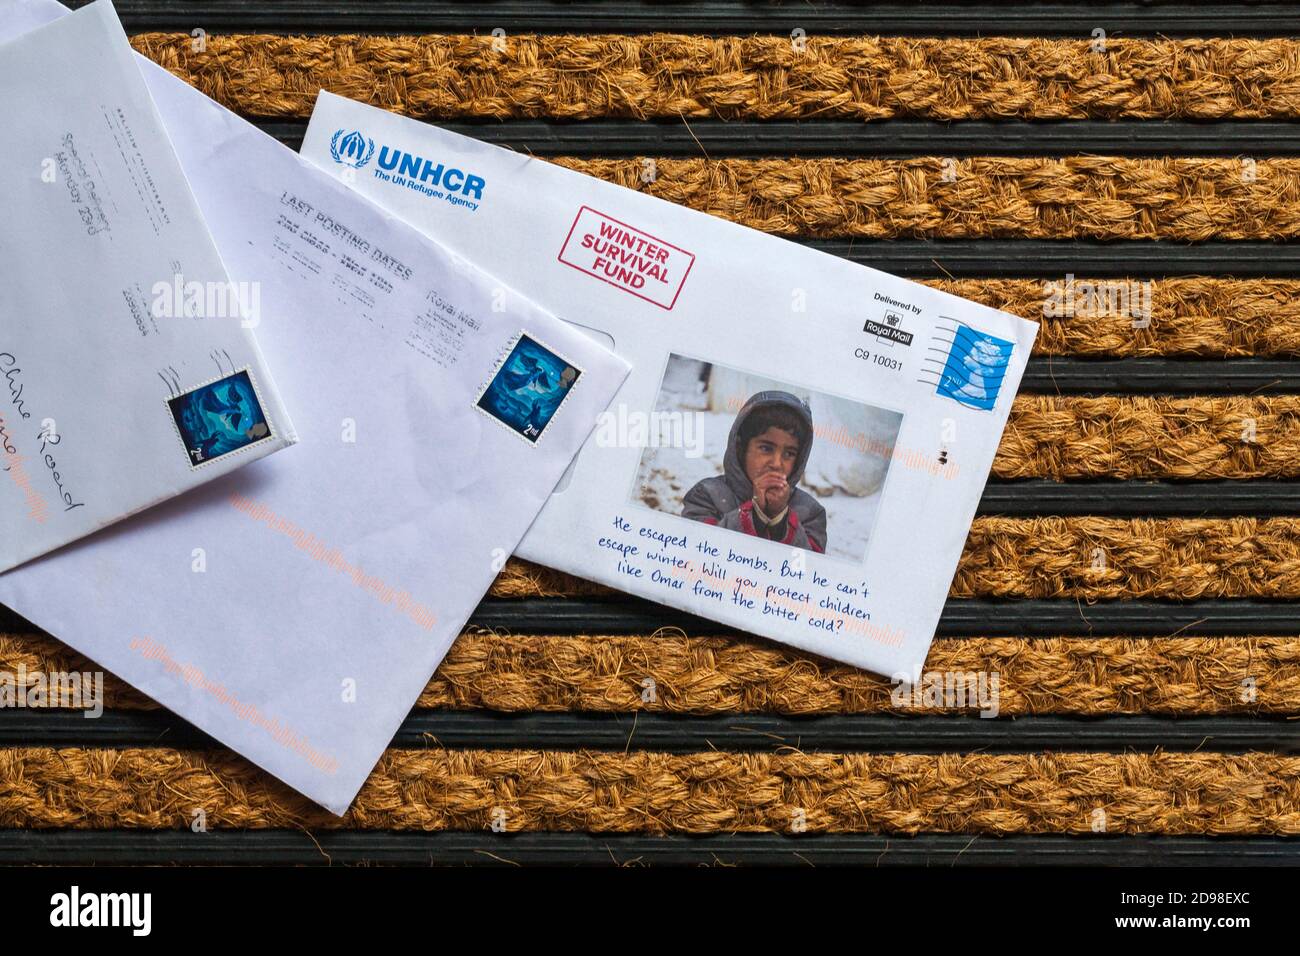 Post mail on doormat - charity appeal, UNHCR The UN Refugee Agency winter survival fund Stock Photo